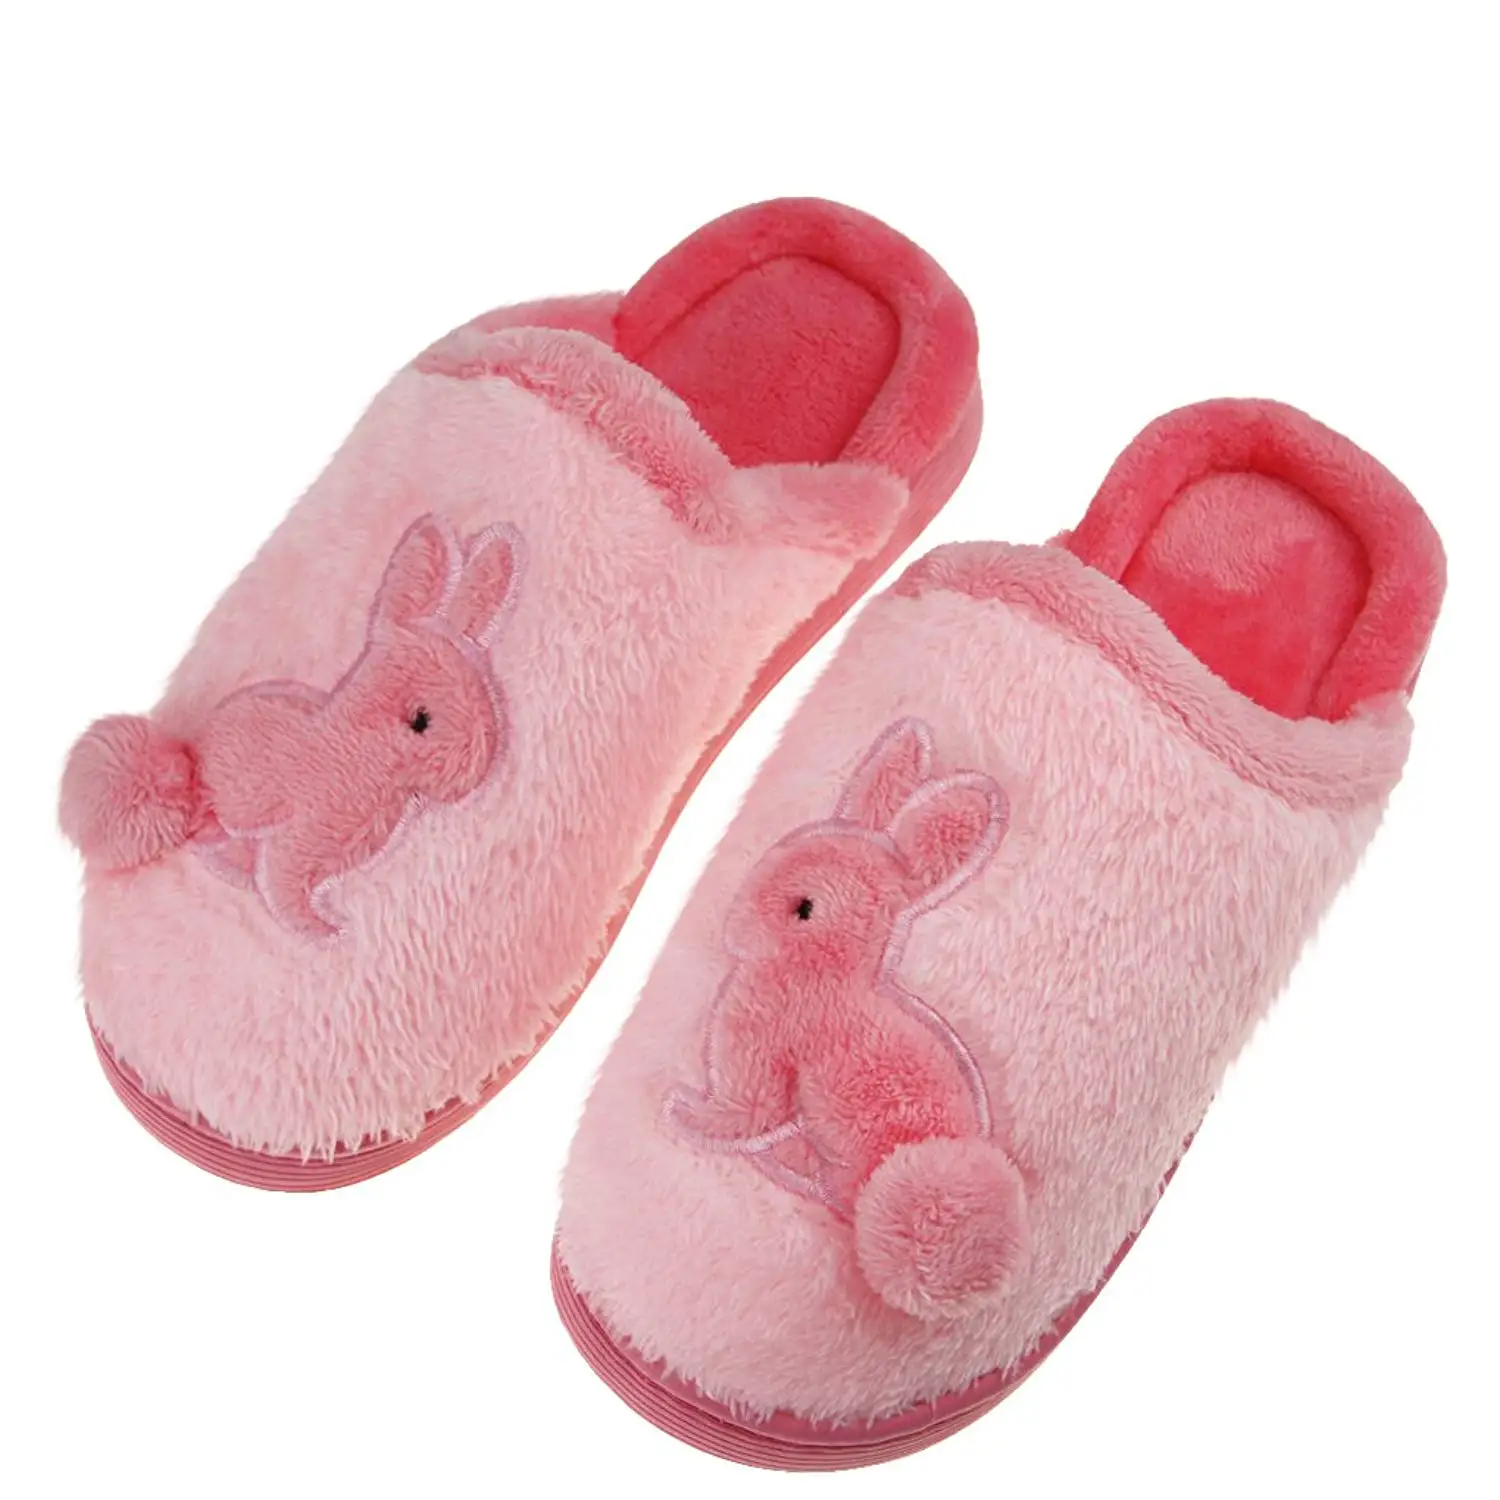 Cute Rabbit Slippers Winter Home Warm Slippery Cotton Slippers Pink